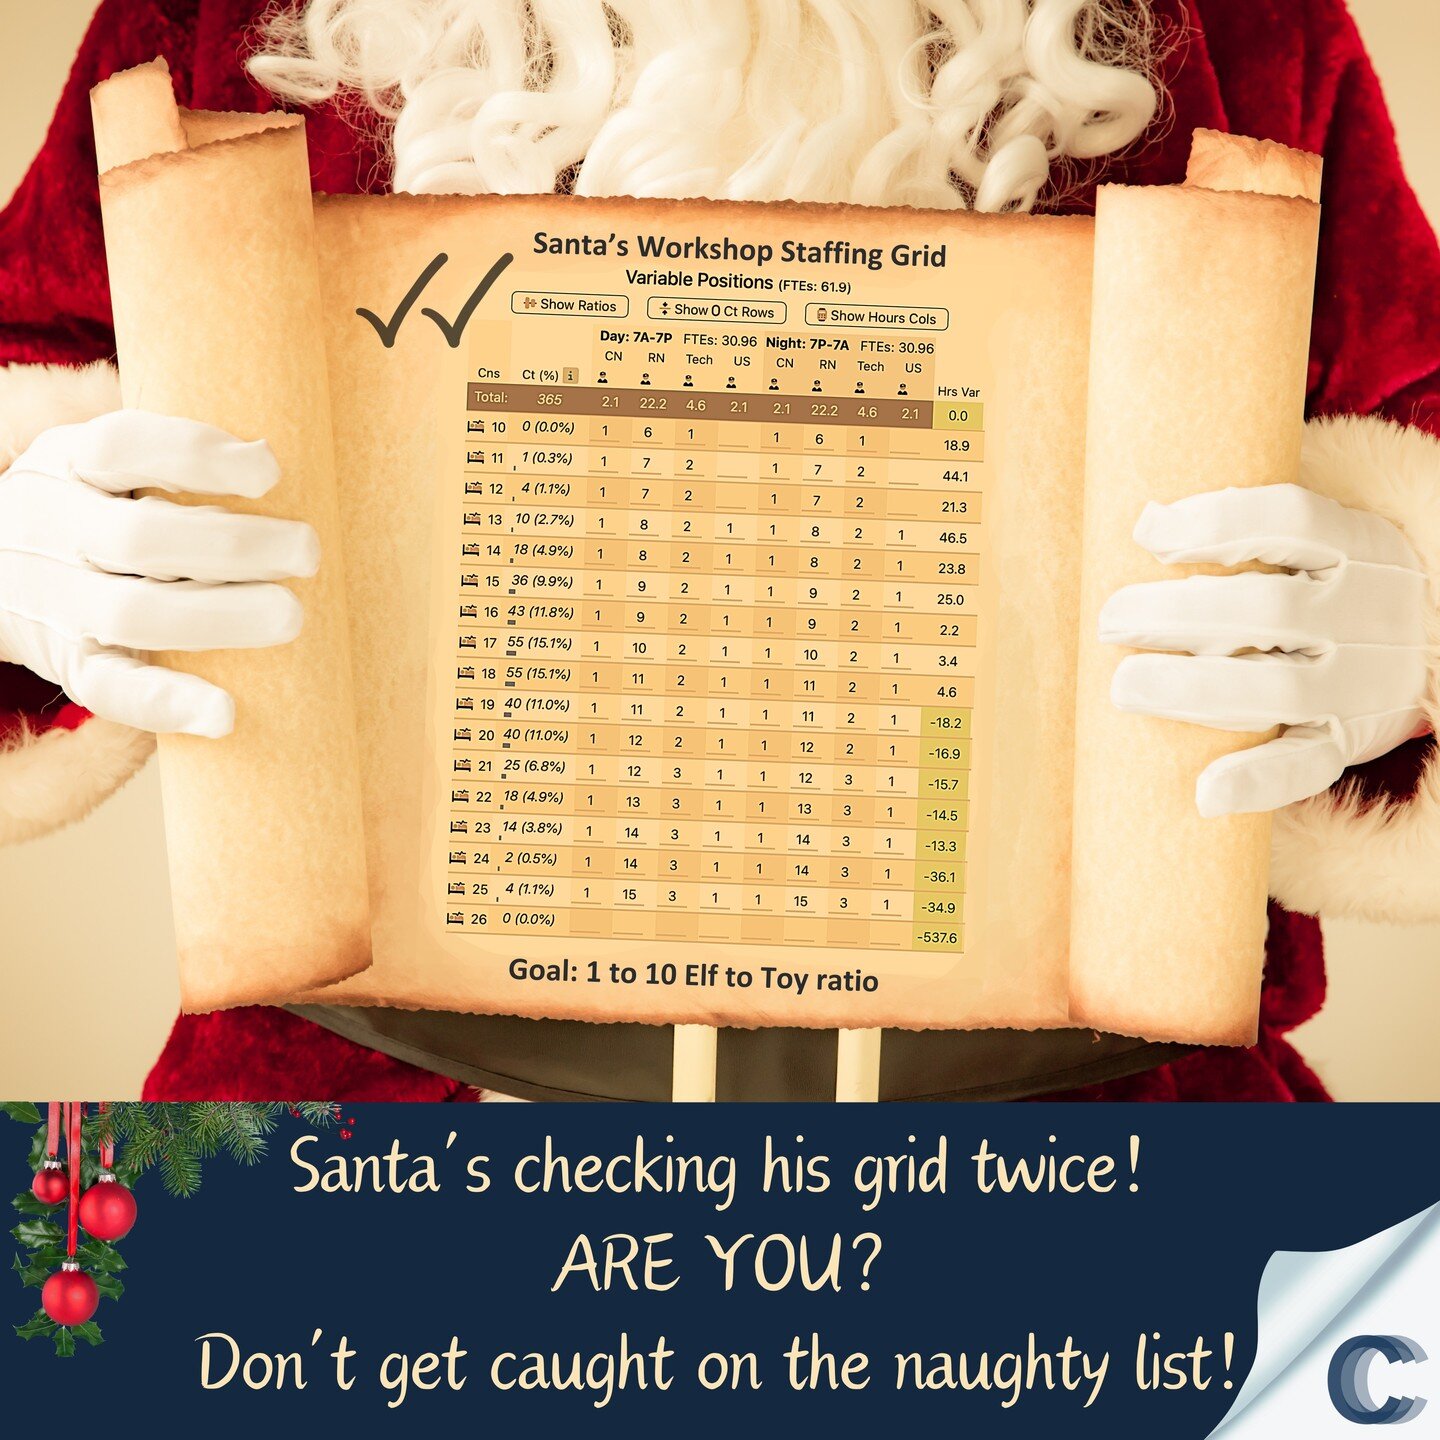 Every 4 hours, review compliance to your staffing grid. Better yet, check it twice. Don't get caught on the naughty list, y'all!
 
One of the most simple and yet significant opportunities to improve unfavorable productivity performance is frequent gr